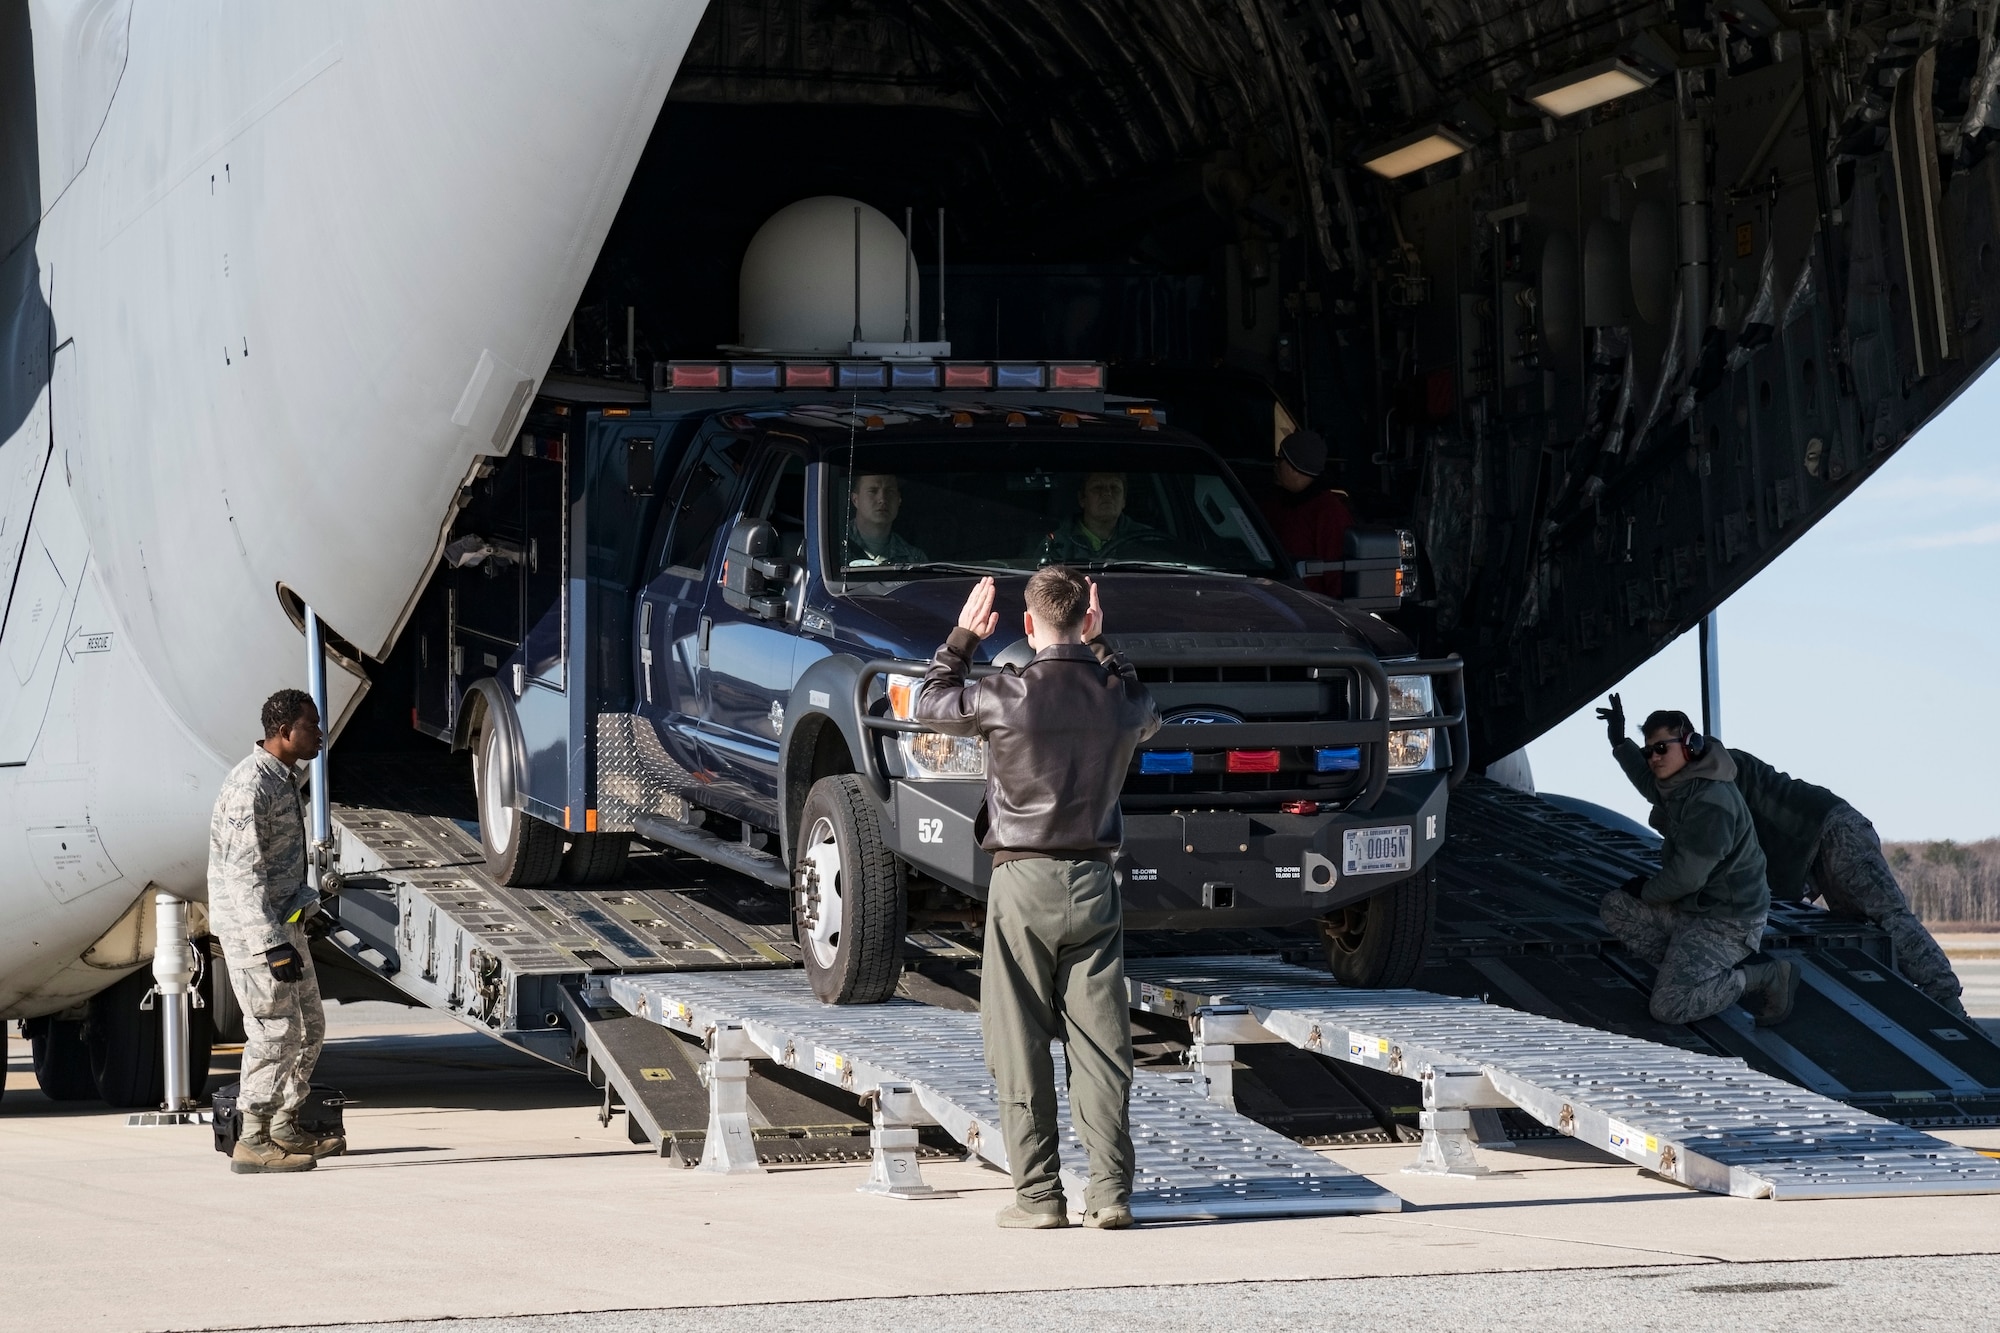 With the assistance of 436th Aerial Port Squadron ramp operations personnel, Staff Sgt. Ryan Stanich, 137th Airlift Squadron C-17 loadmaster, Stewart Air National Guard Base, Newburgh, N.Y., marshals a vehicle backing up on the DOMOPS Airlift Modular Approach Shoring Jan. 11, 2019, at Dover Air Force Base, Del. The vehicles belong to the Delaware National Guard's 31st Civil Support Team, Weapons of Mass Destruction headquartered in Smyrna, Del. The vehicles and team members were airlifted to Florida to support the Florida National Guard during a large-scale training exercise Jan. 14-18. The 31st CST maintains the capability to mitigate the consequences of any WMD or Nuclear, Biological, and Chemical event, whether natural or man-made. They are experts in WMD effects and NBC defense operations. (U.S. Air Force photo by Roland Balik)